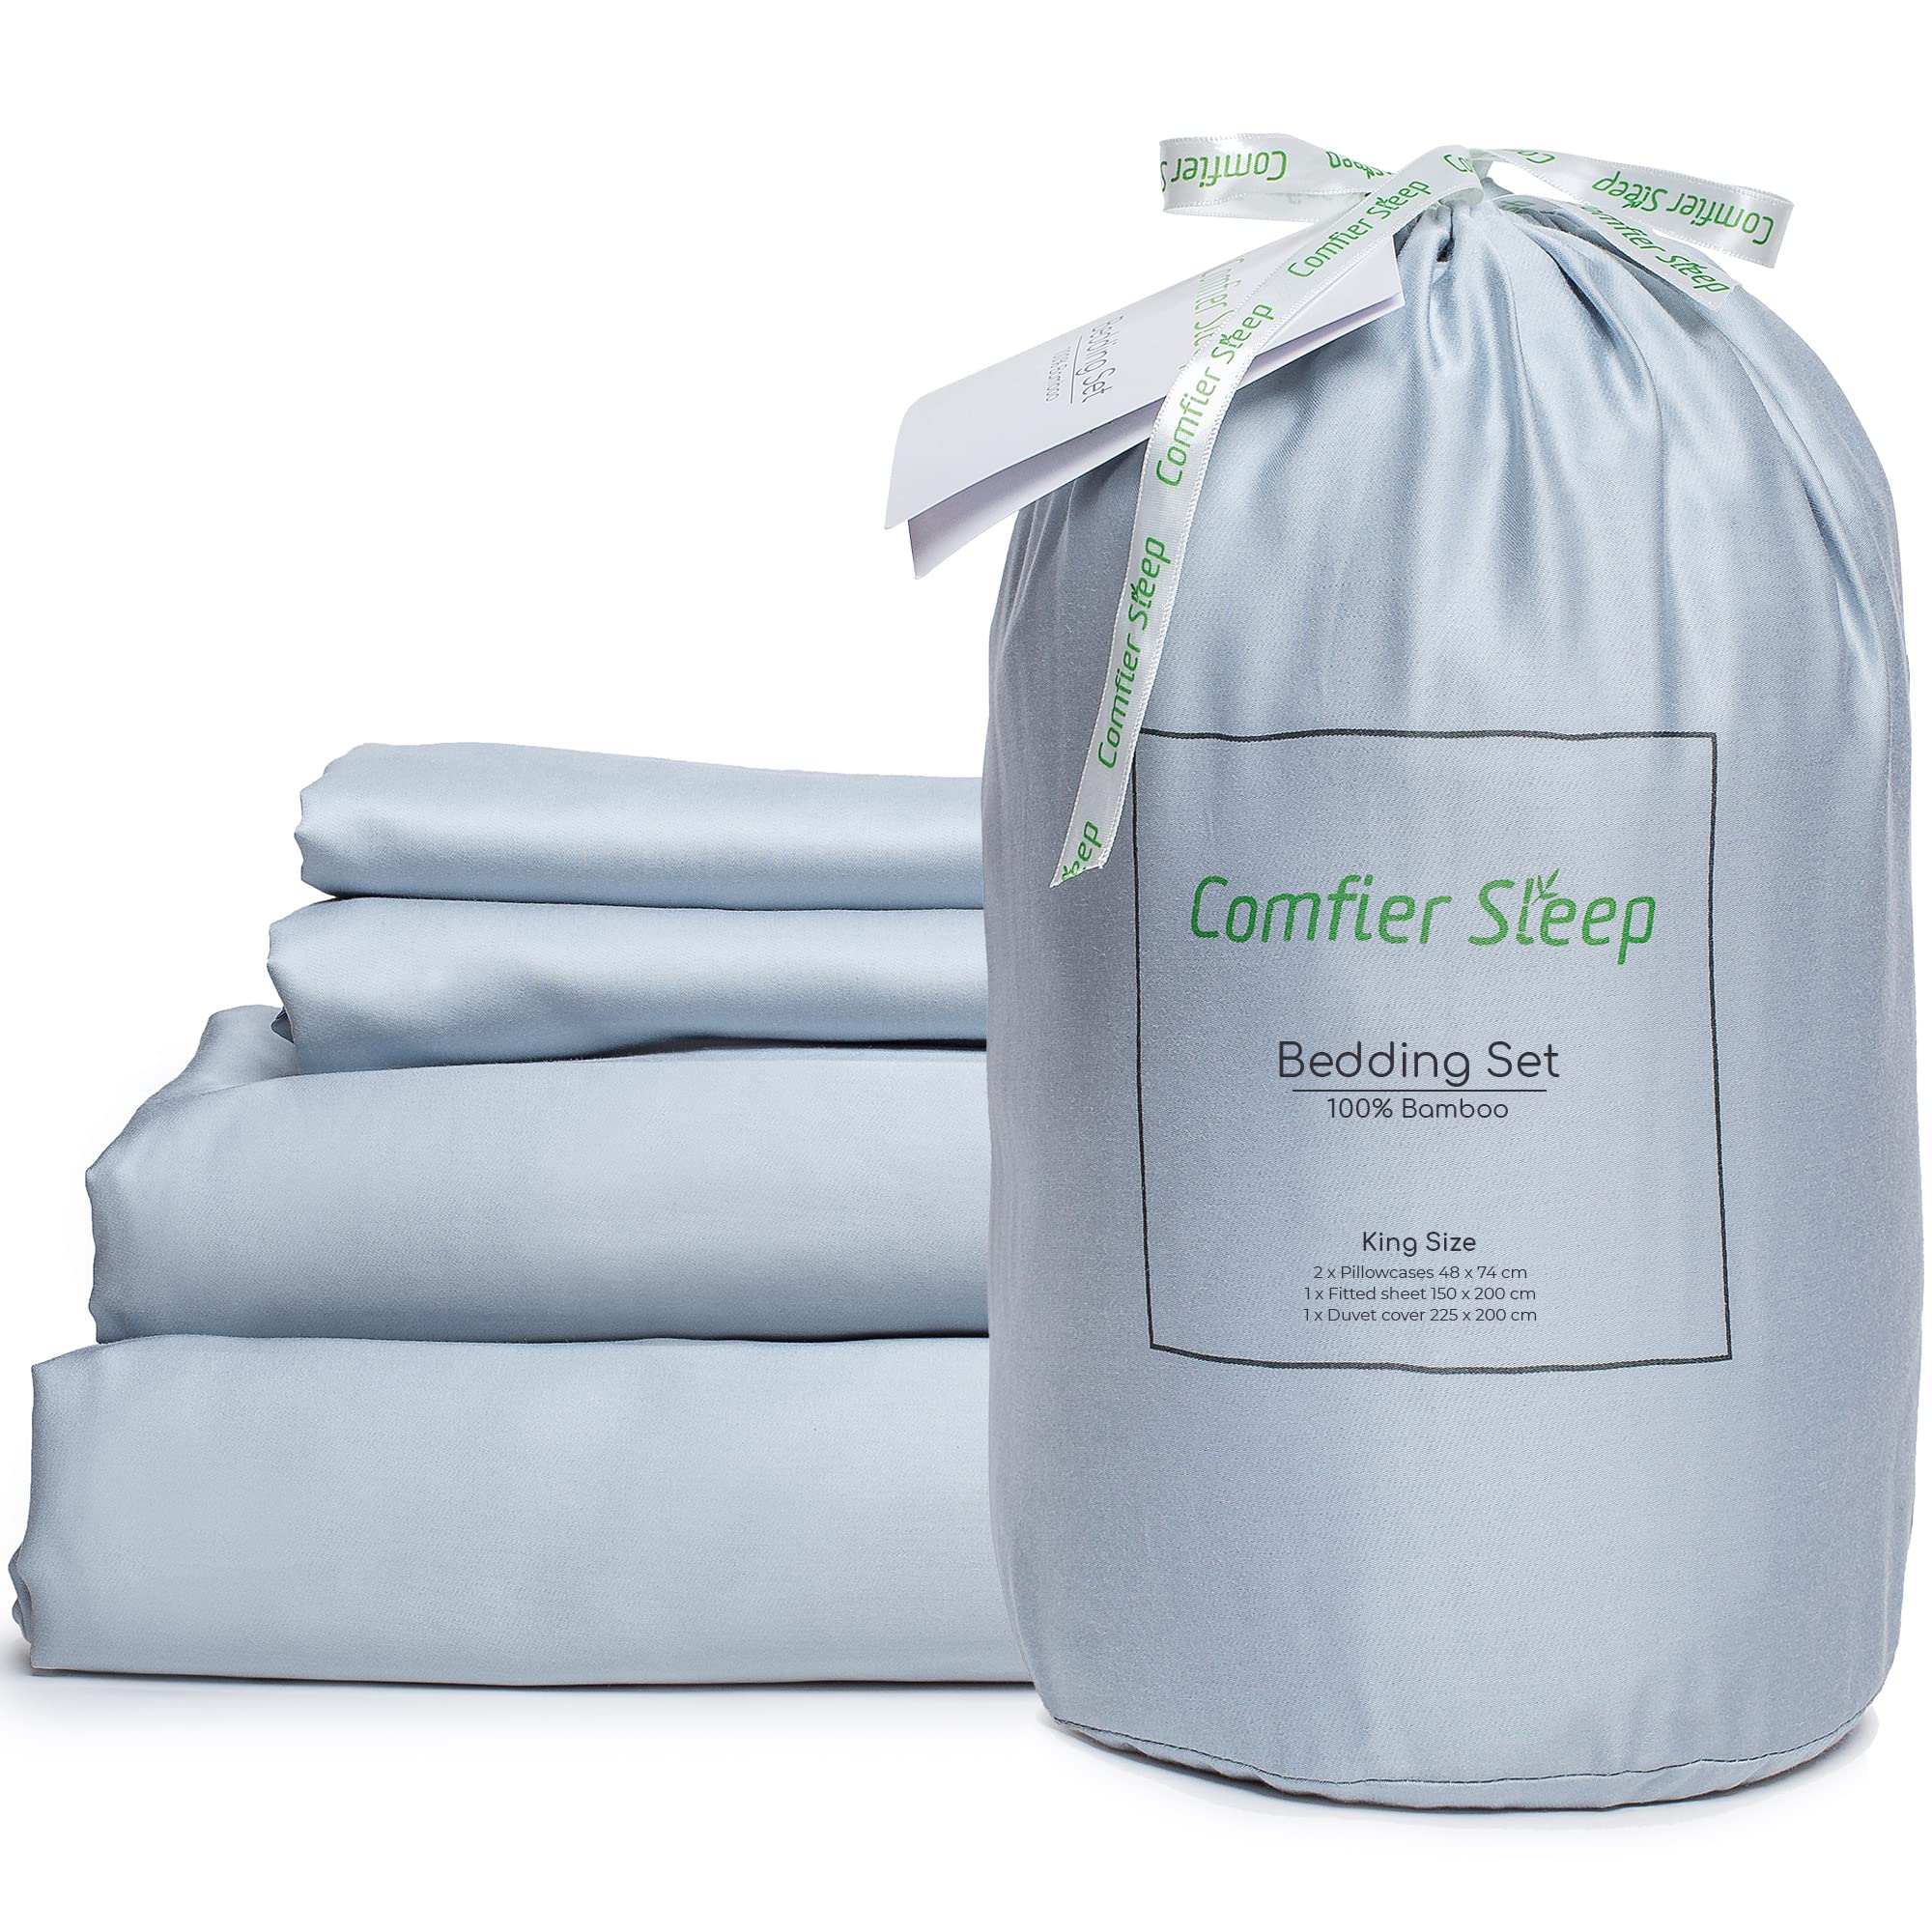 100% Bamboo Bedding Set King Size 100% Organic Including Bamboo Fitted Sheet 150x200cm Bamboo Pillow Cases 48x74 cm and Duvet Cover 225x200 cm Ultra Soft Grey Blue Bedding